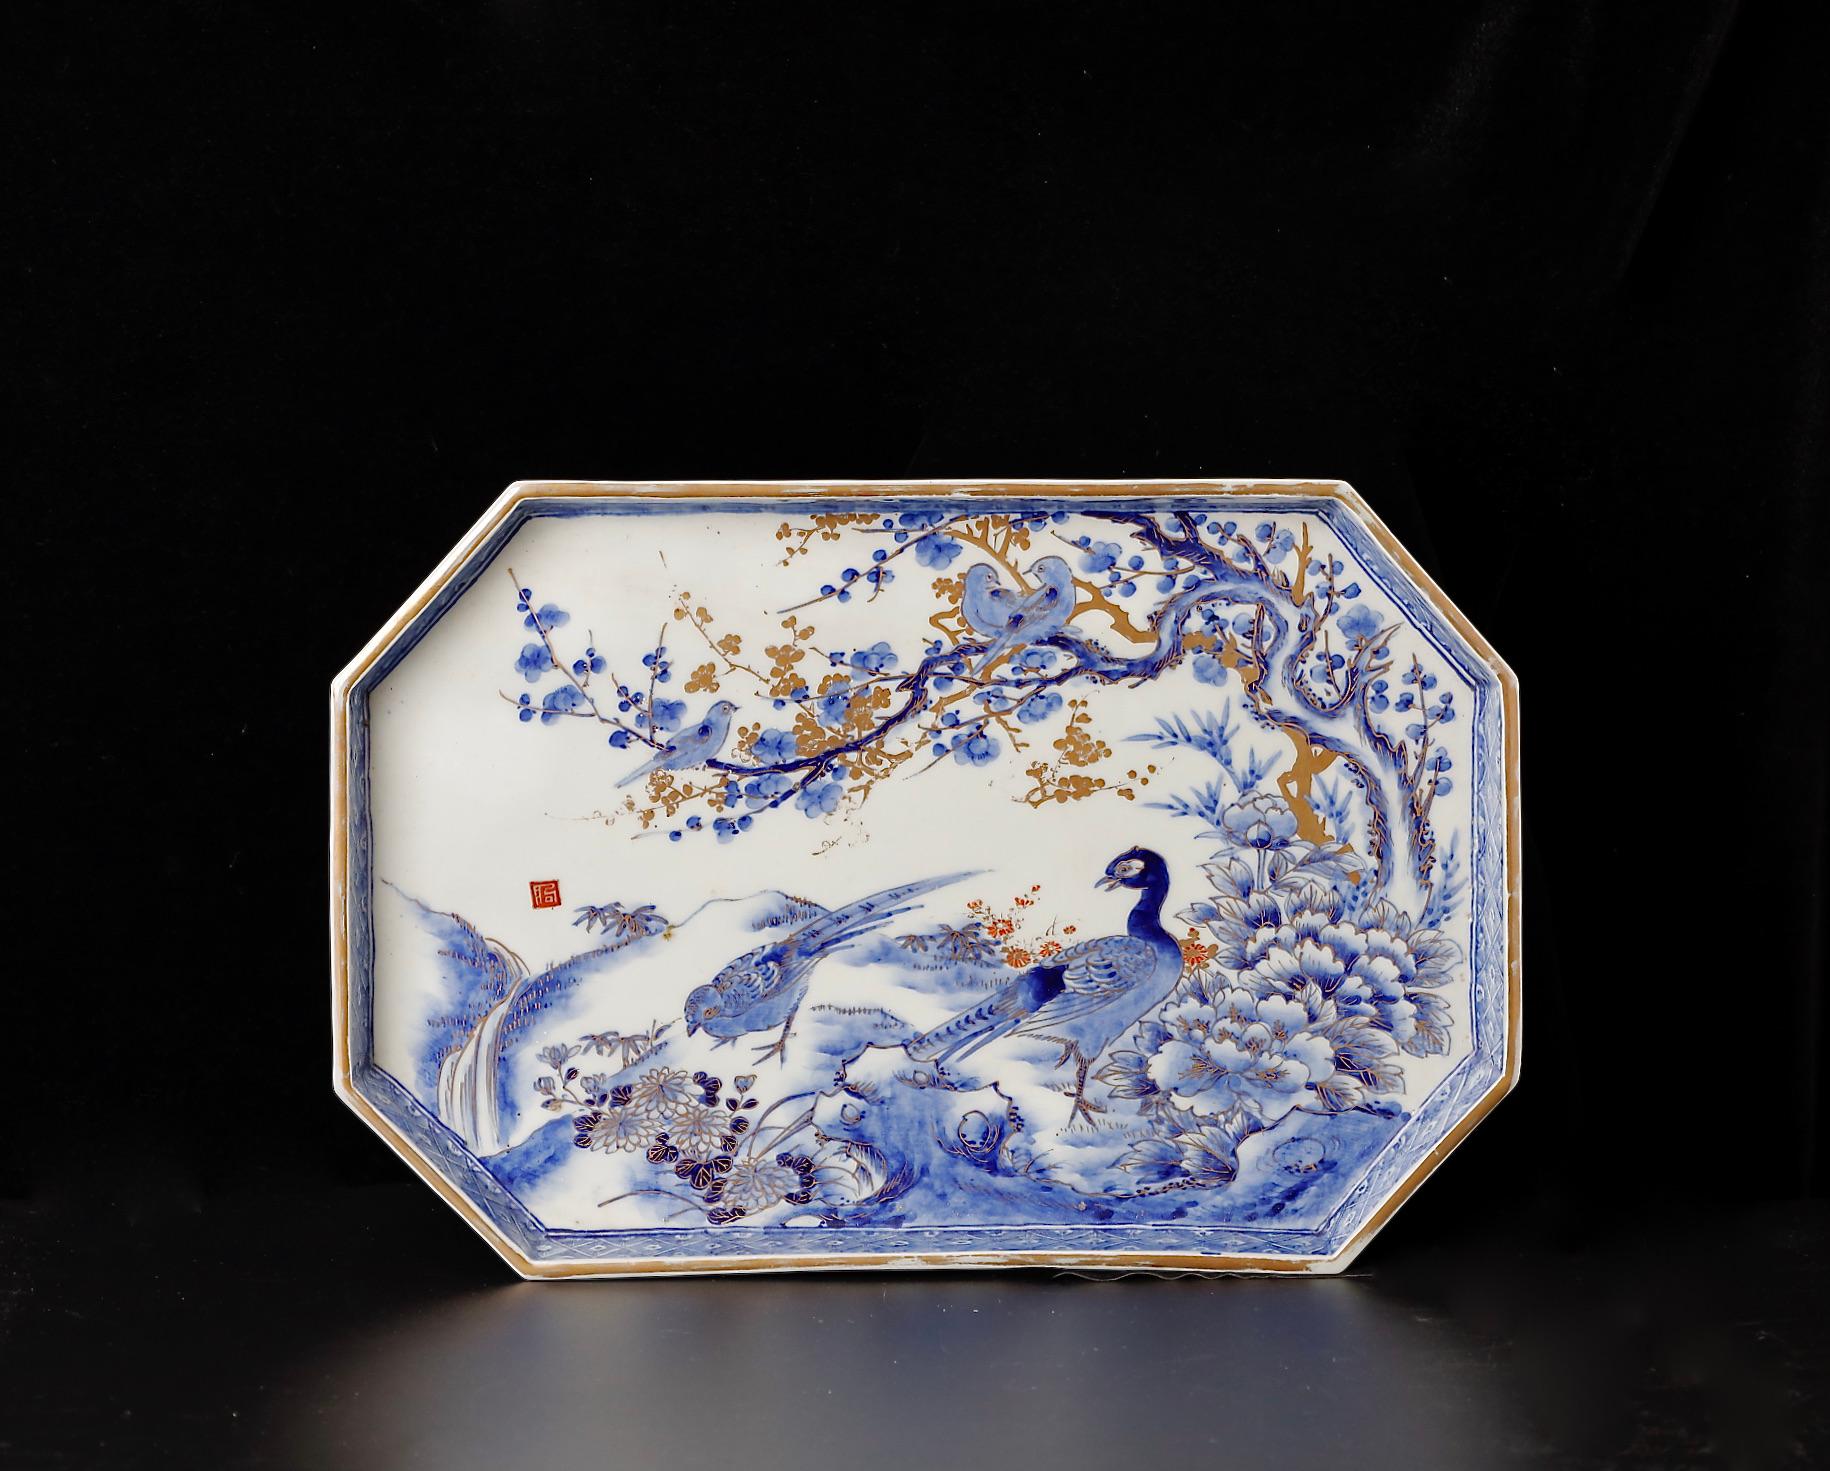 This striking Imari ware plate (SKU: ZD48) is an outstanding representation of late 18th to 19th-century Japanese porcelain artistry, capturing the refined beauty and detailed craftsmanship of the Edo period. The plate features a pair of regal